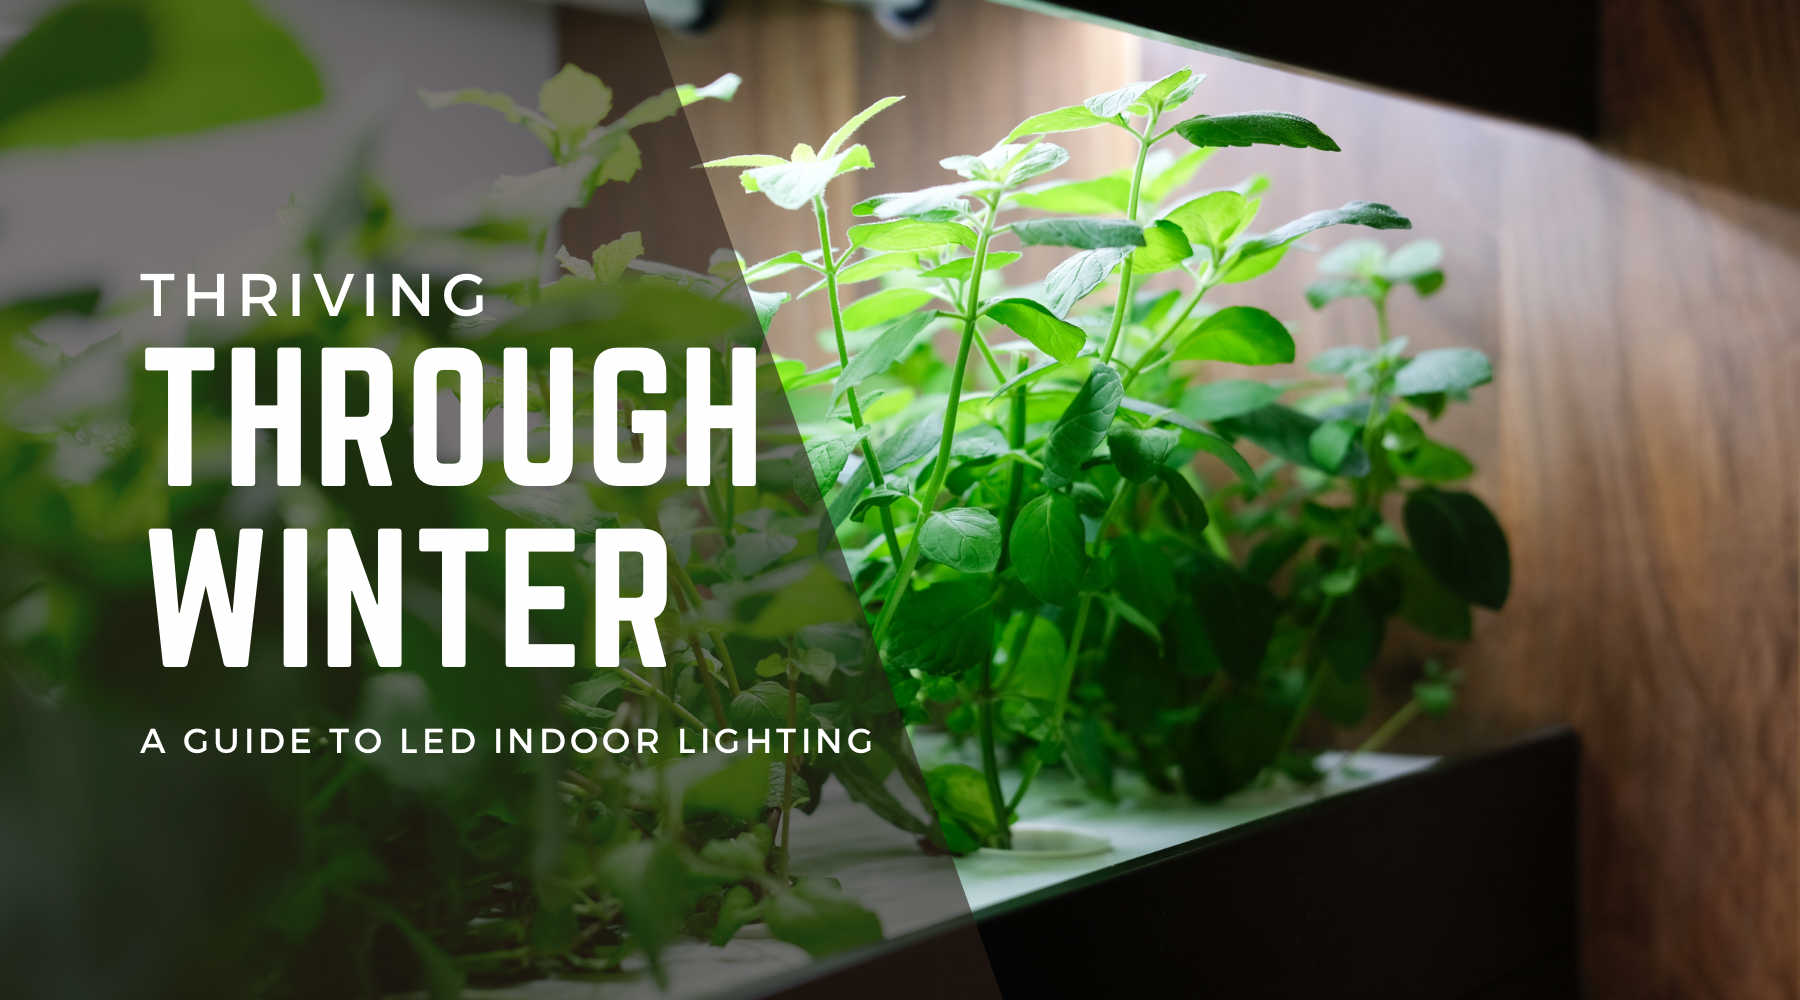 Thriving Through Winter: A Guide to Indoor Plant Care with LED Grow Lights from TWSG